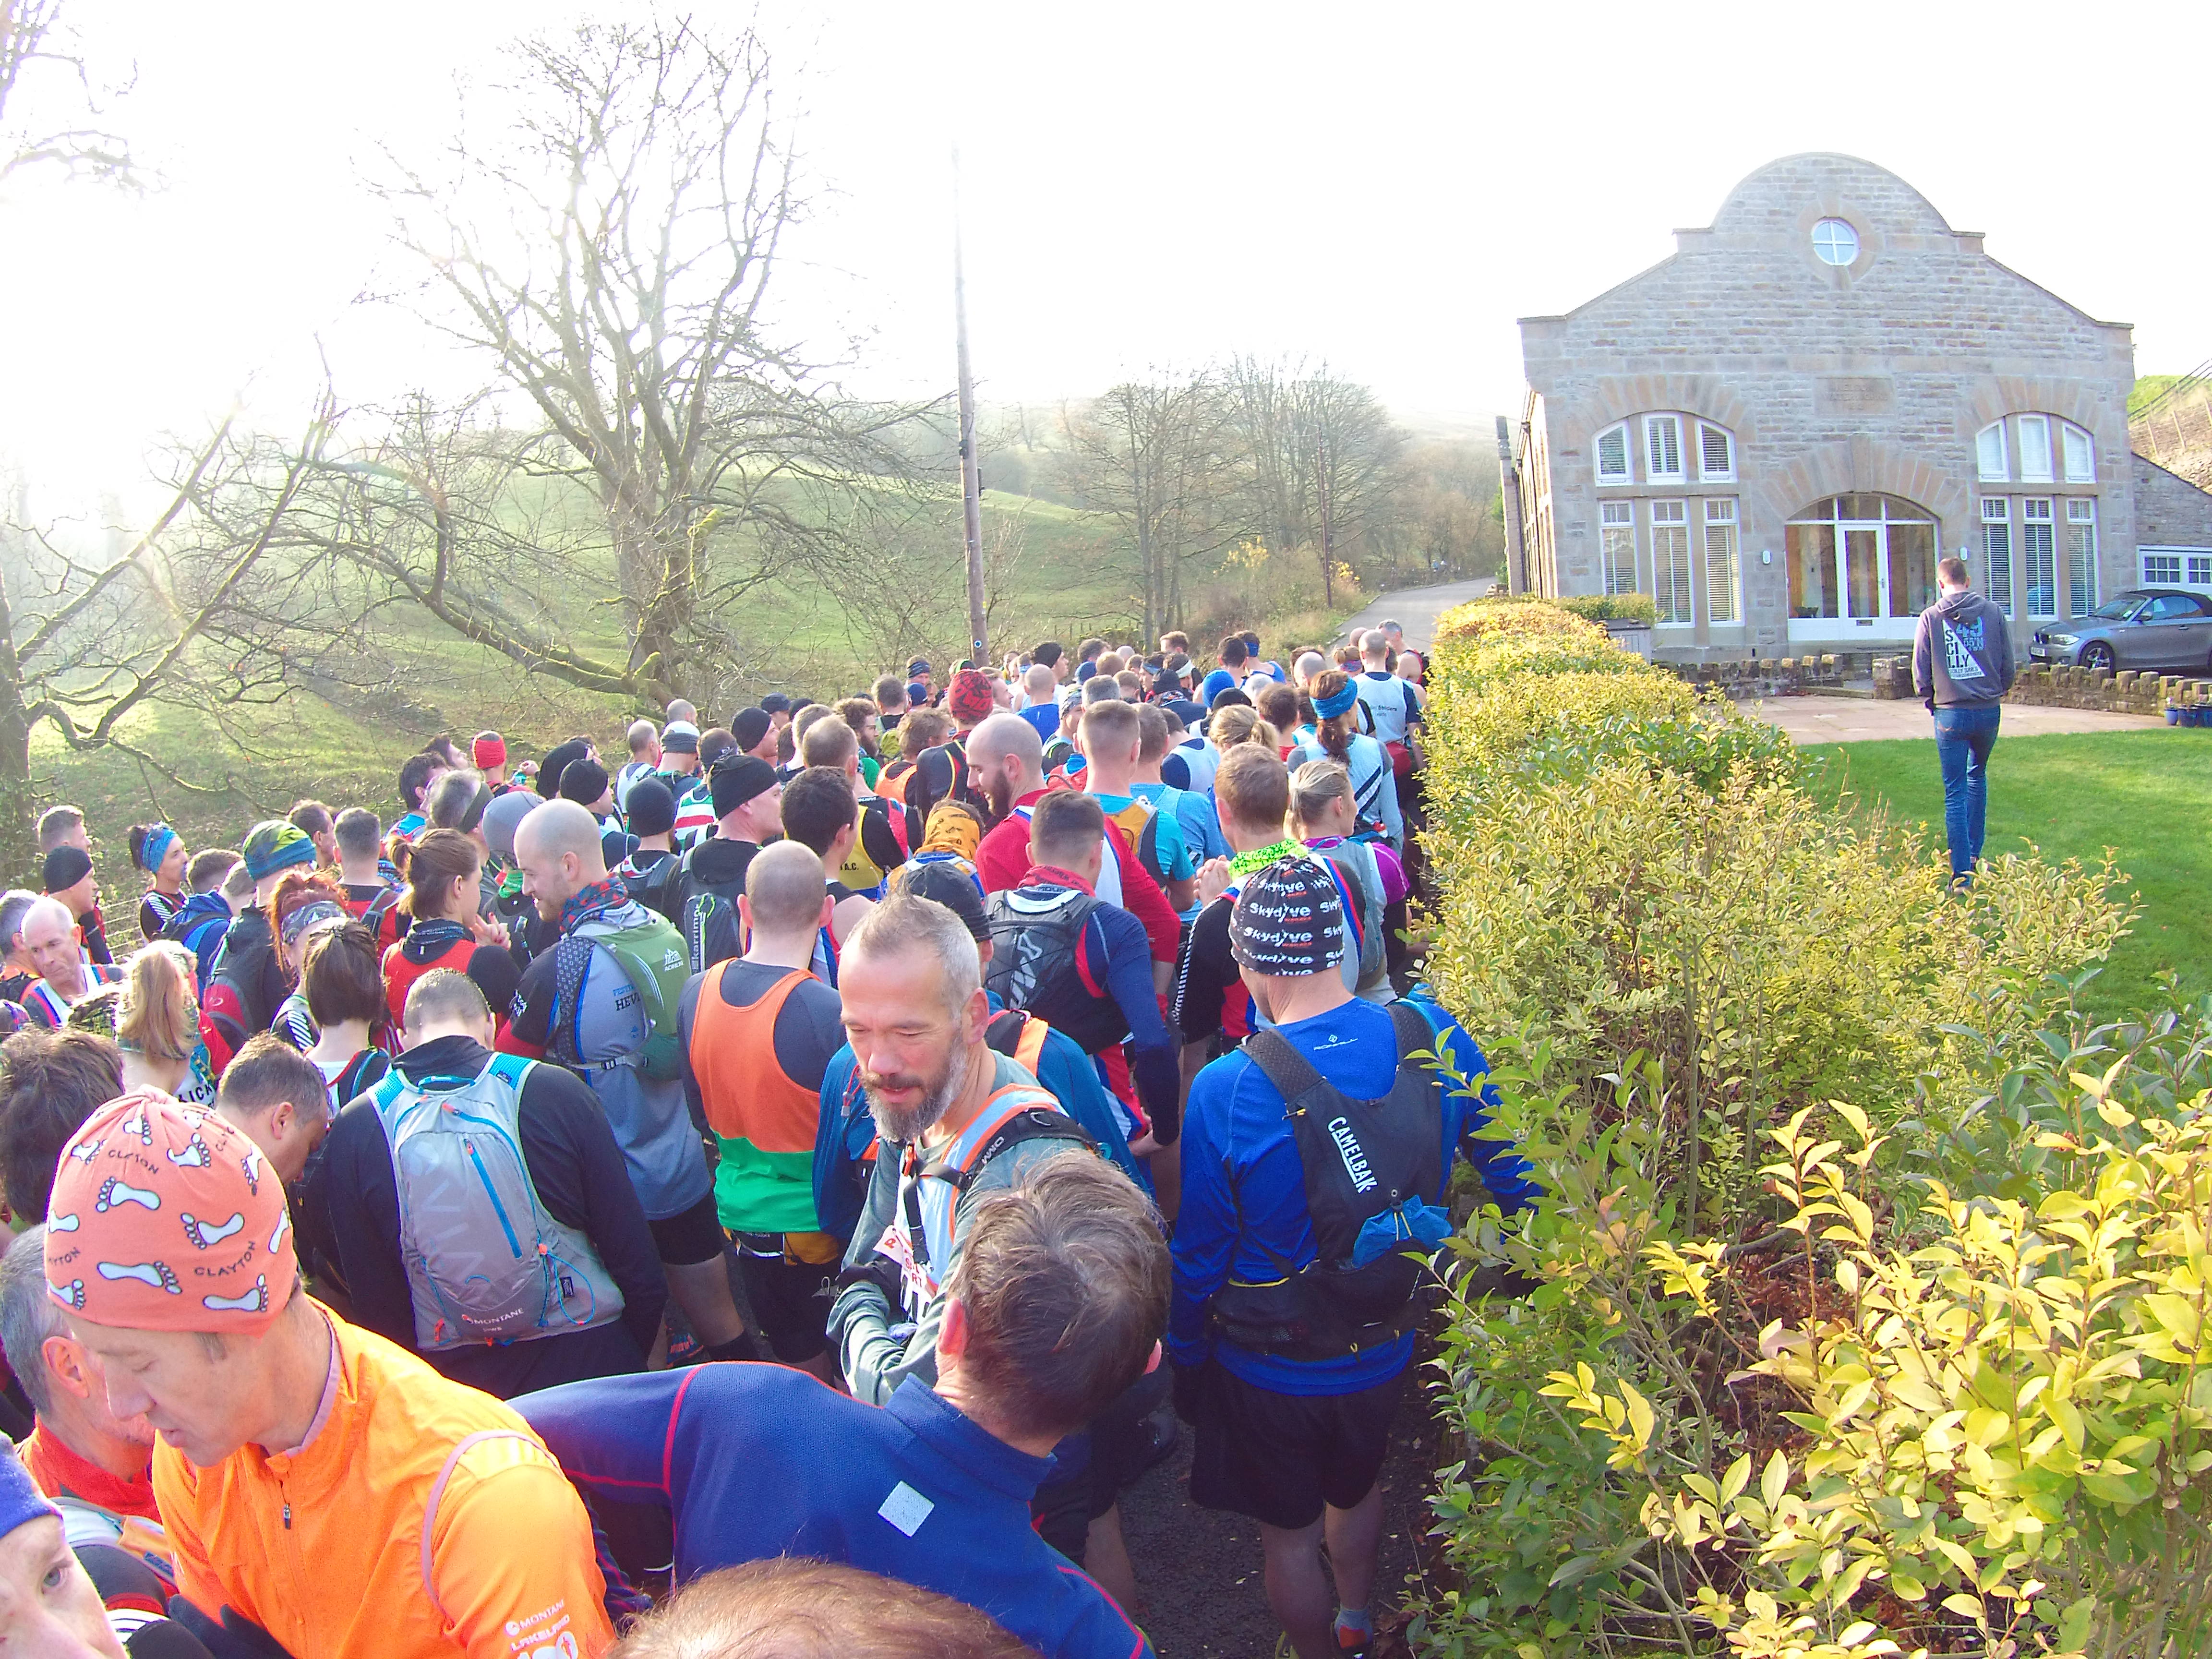 Fell Runner, Tour of Pendle, Pendle hill, Fell Race